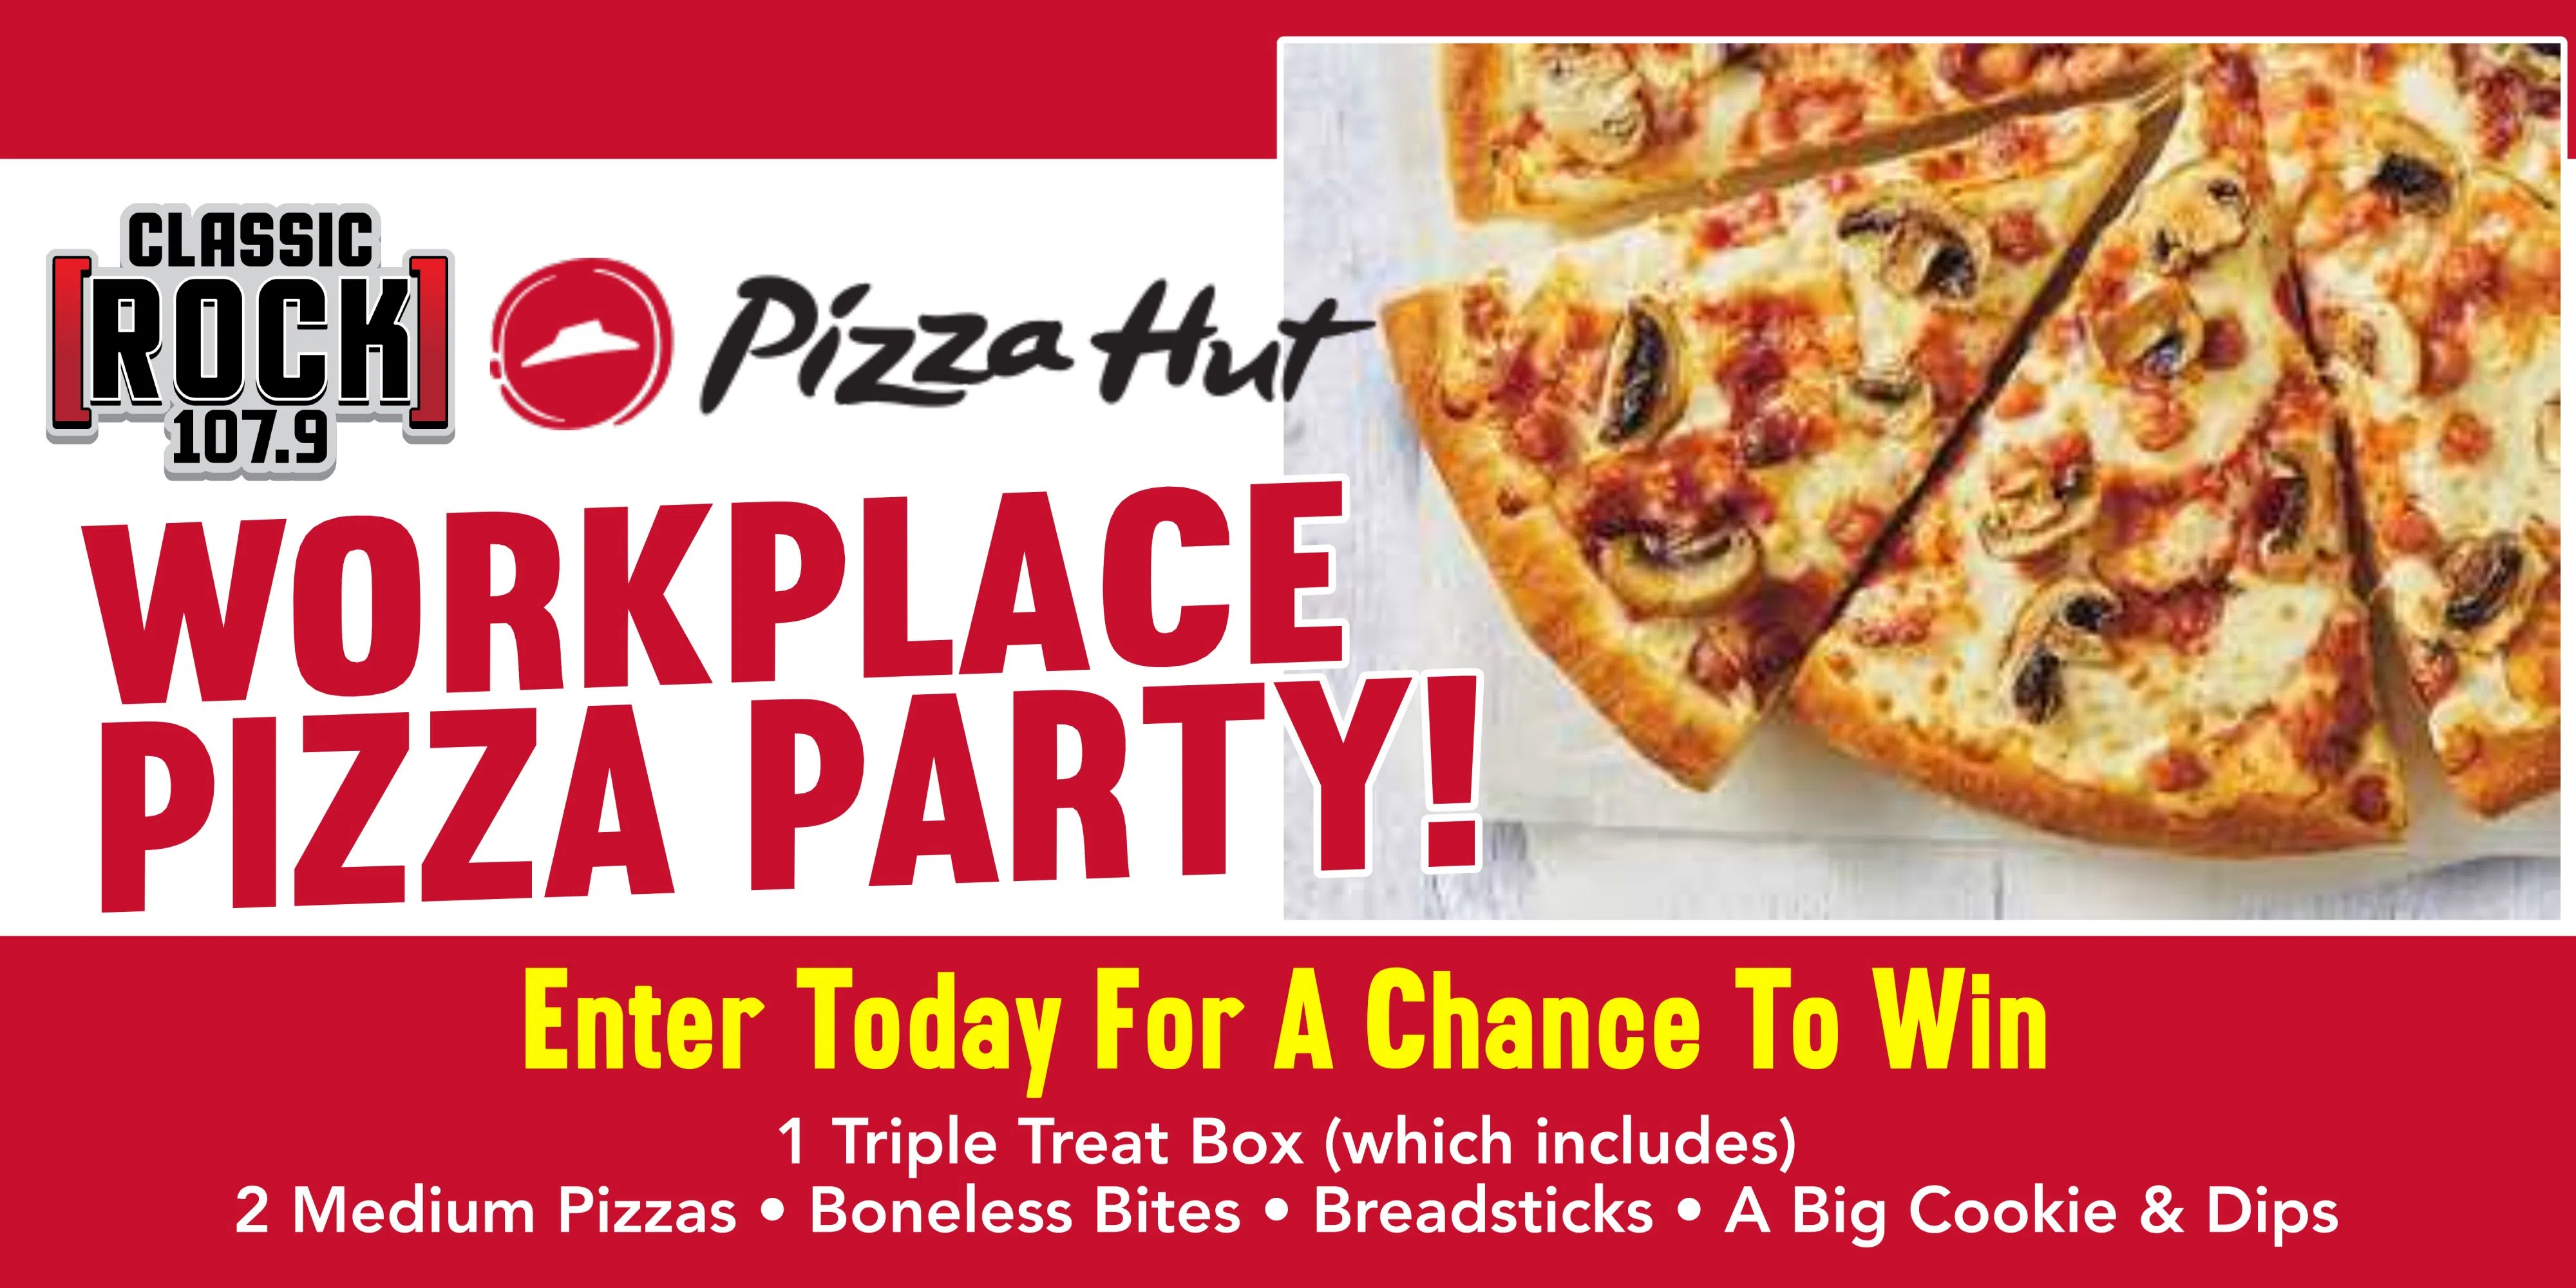 107.9 Classic Rock Pizza Hut Workplace Pizza Party!